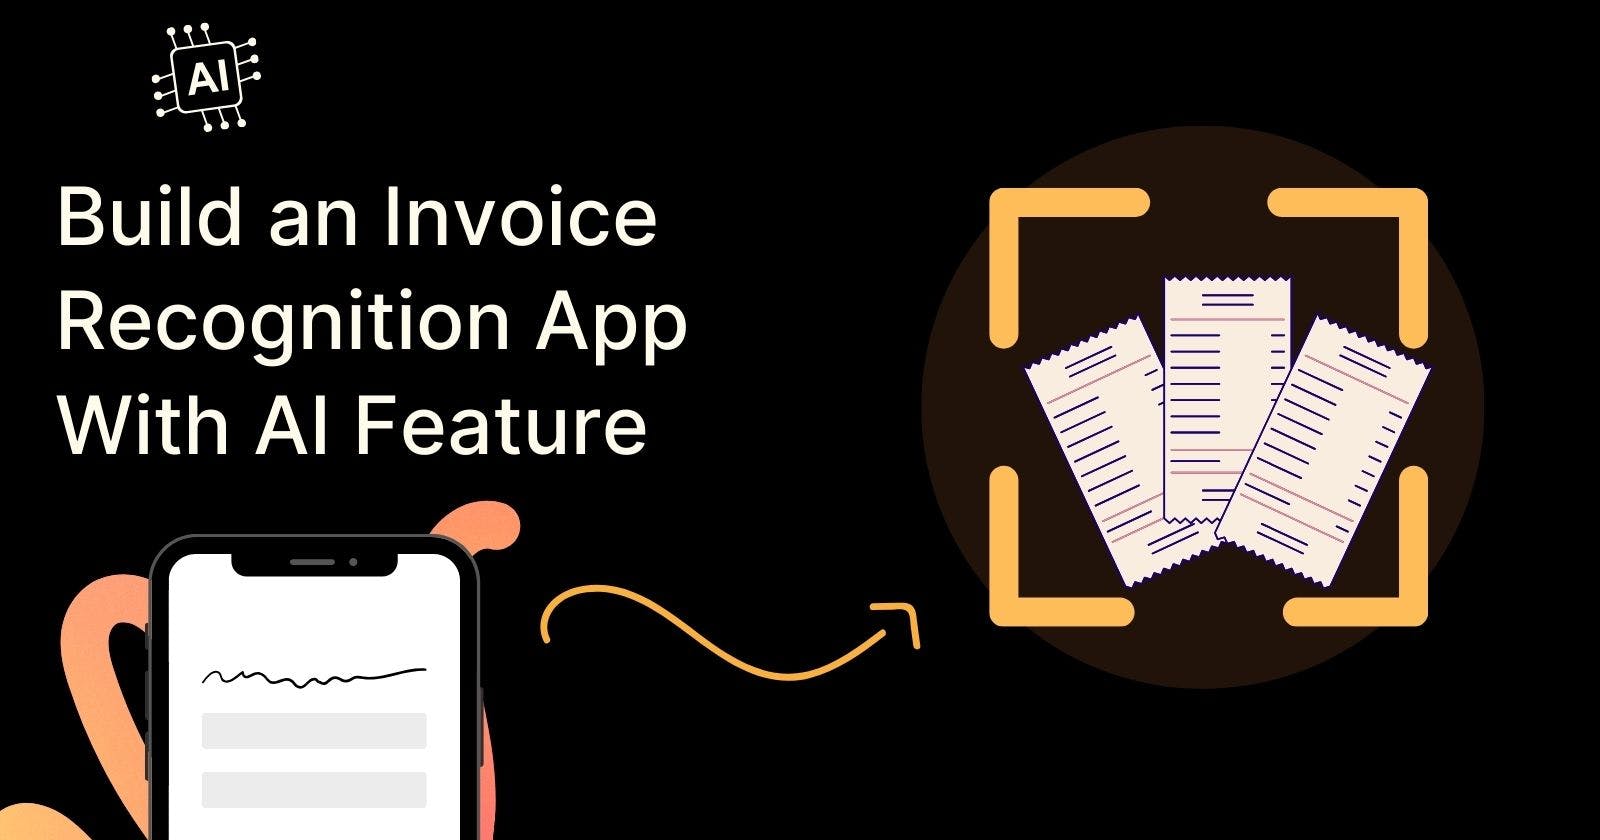 Build an Invoice Recognition App with Clappia's AI Feature